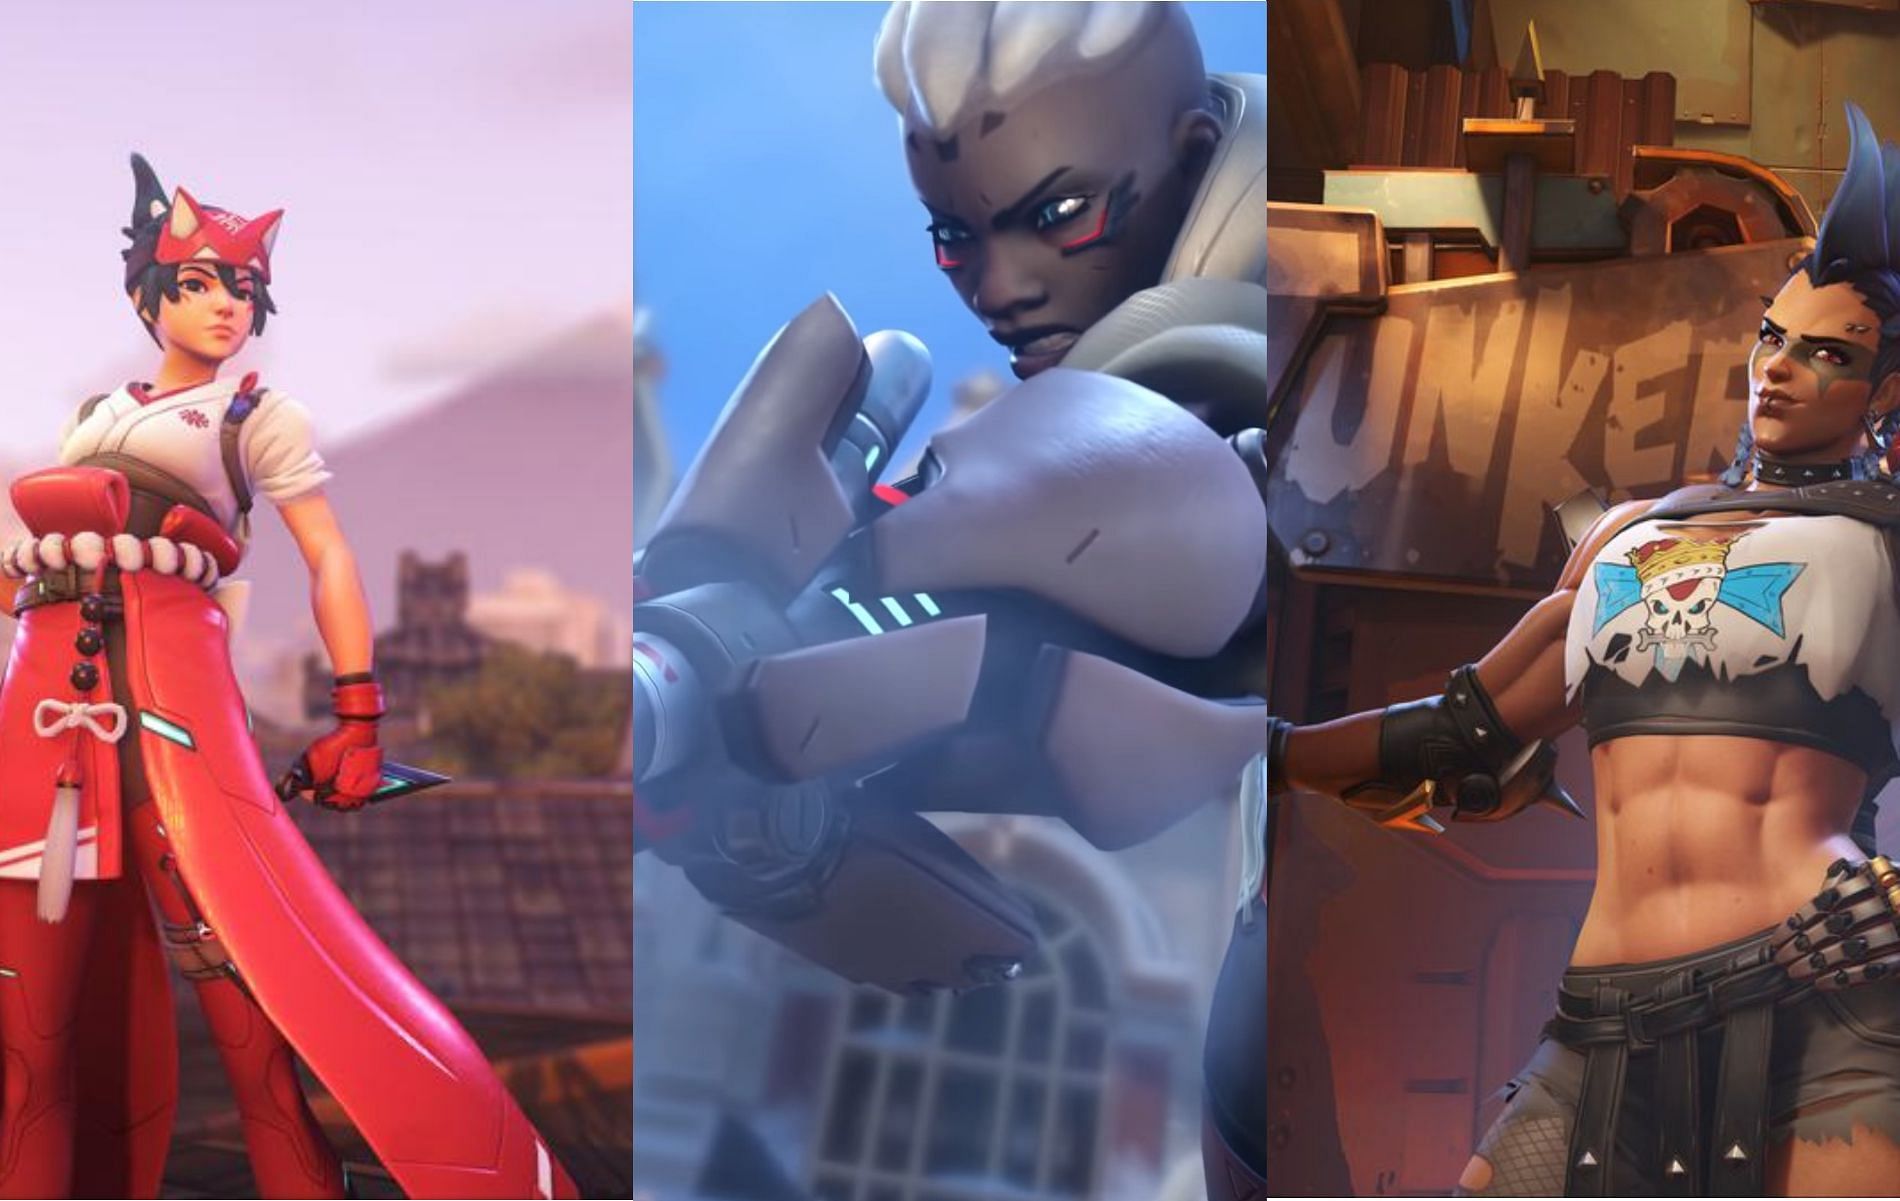 Images of the new heroes Kiriko, Sojourn, and Junker Queen respectively (Images via Blizzard Entertainment)